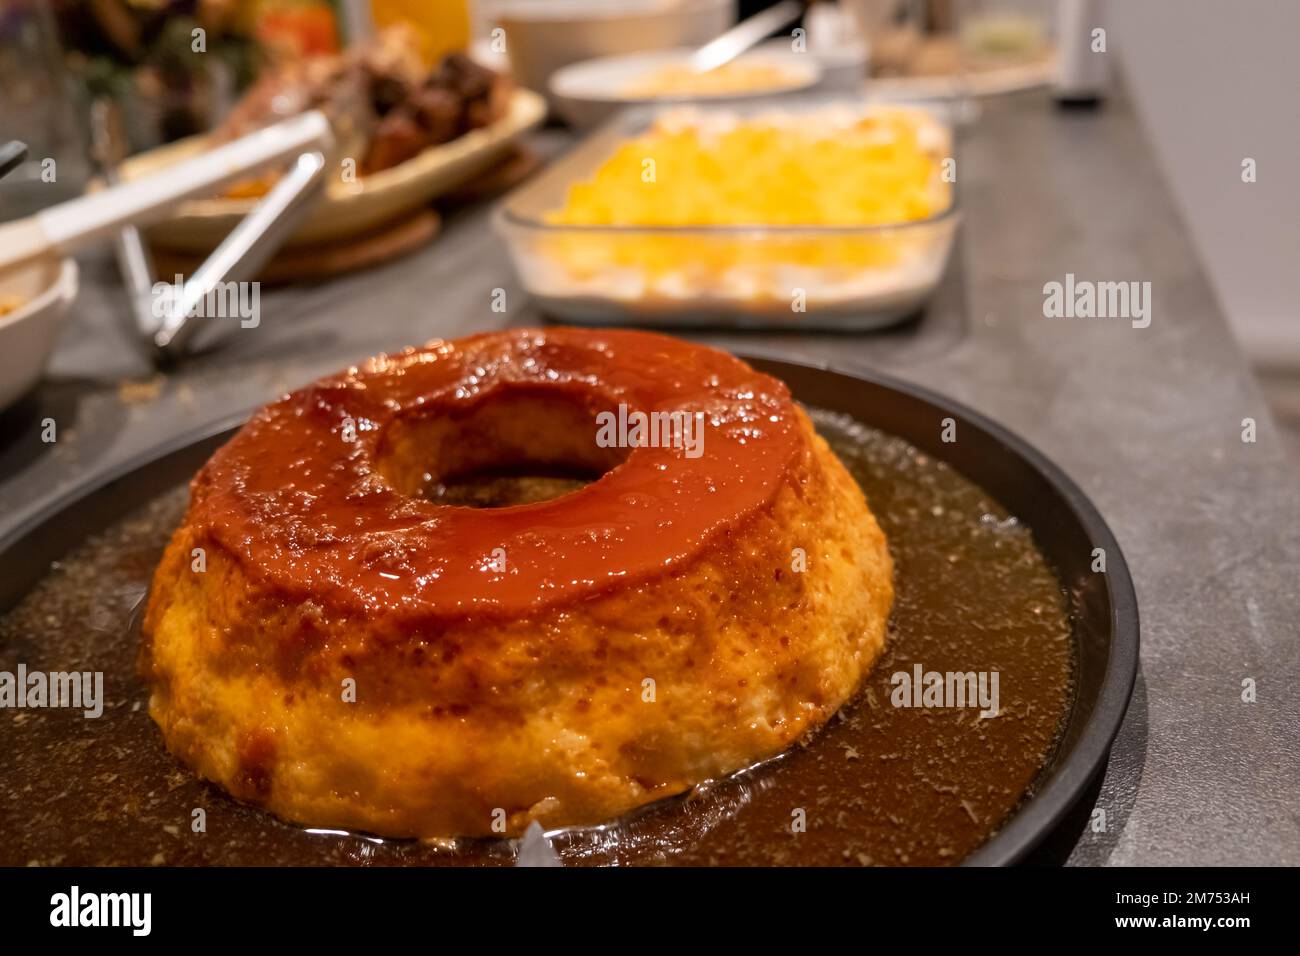 https://c8.alamy.com/comp/2M753AH/traditional-brazilian-desserts-pave-and-pudim-served-at-a-decorated-new-years-table-with-golden-candles-2M753AH.jpg